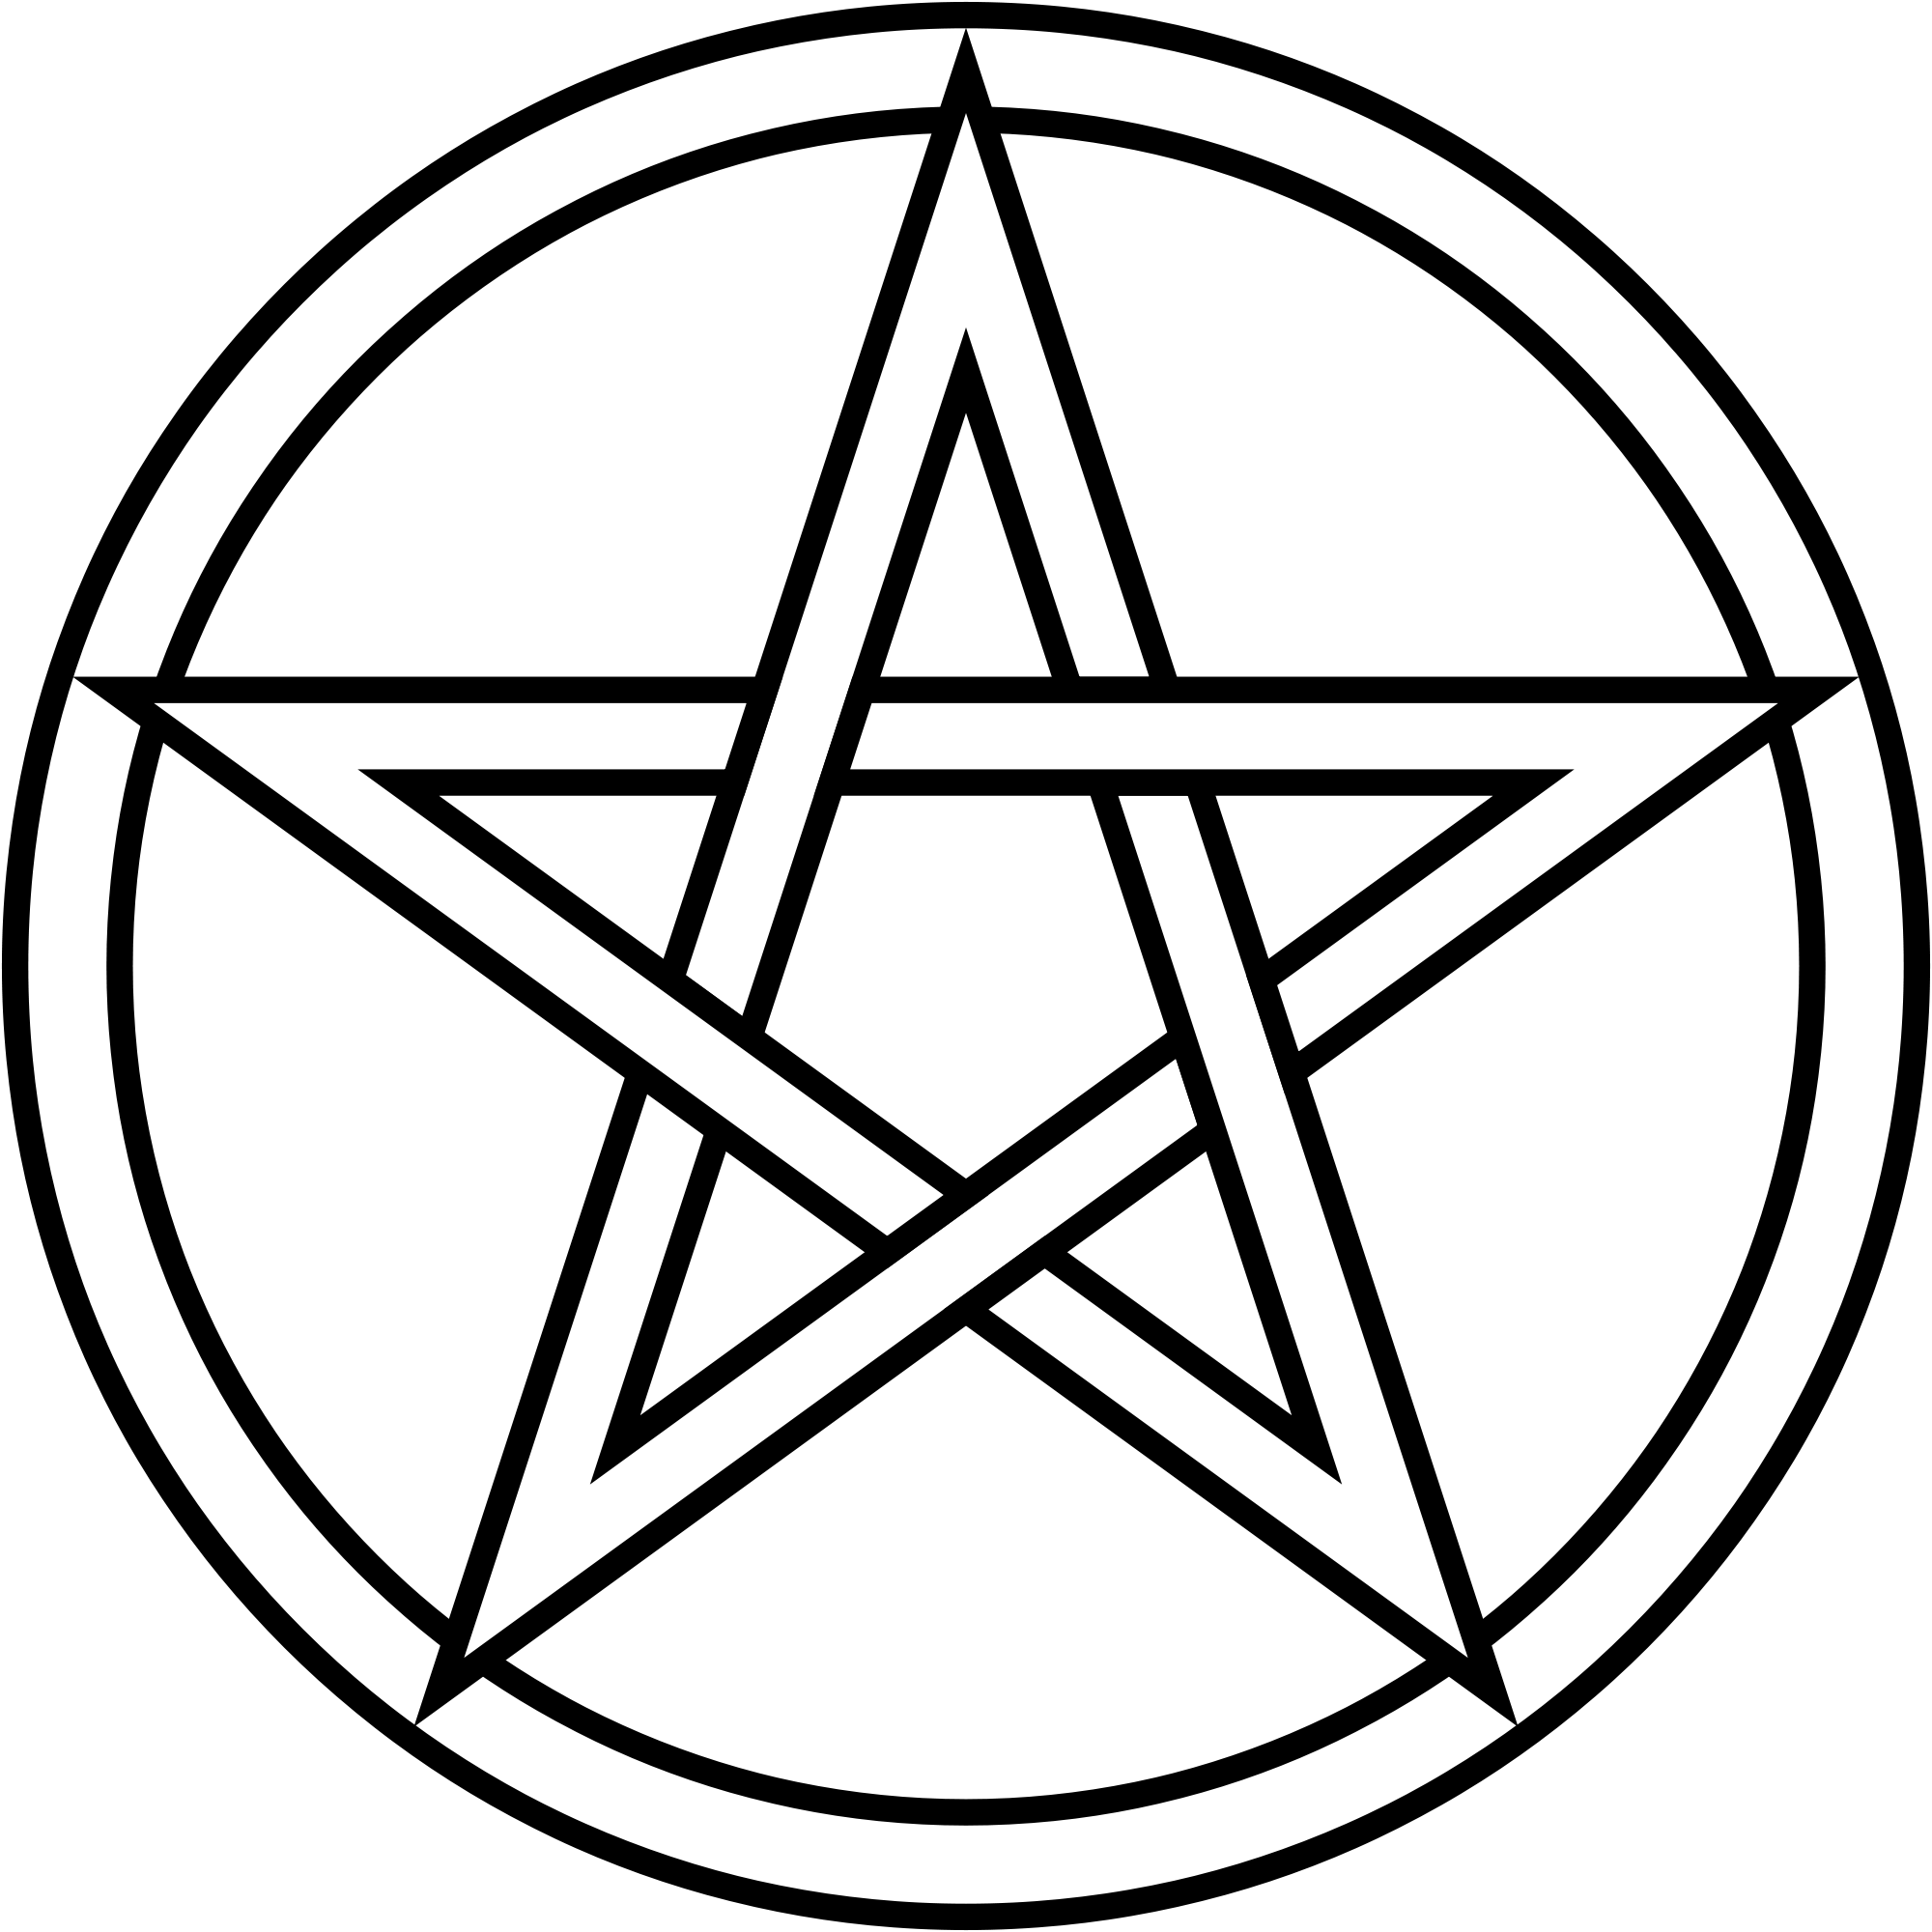 File:Pentacle 3.svg - Wikimedia Commons